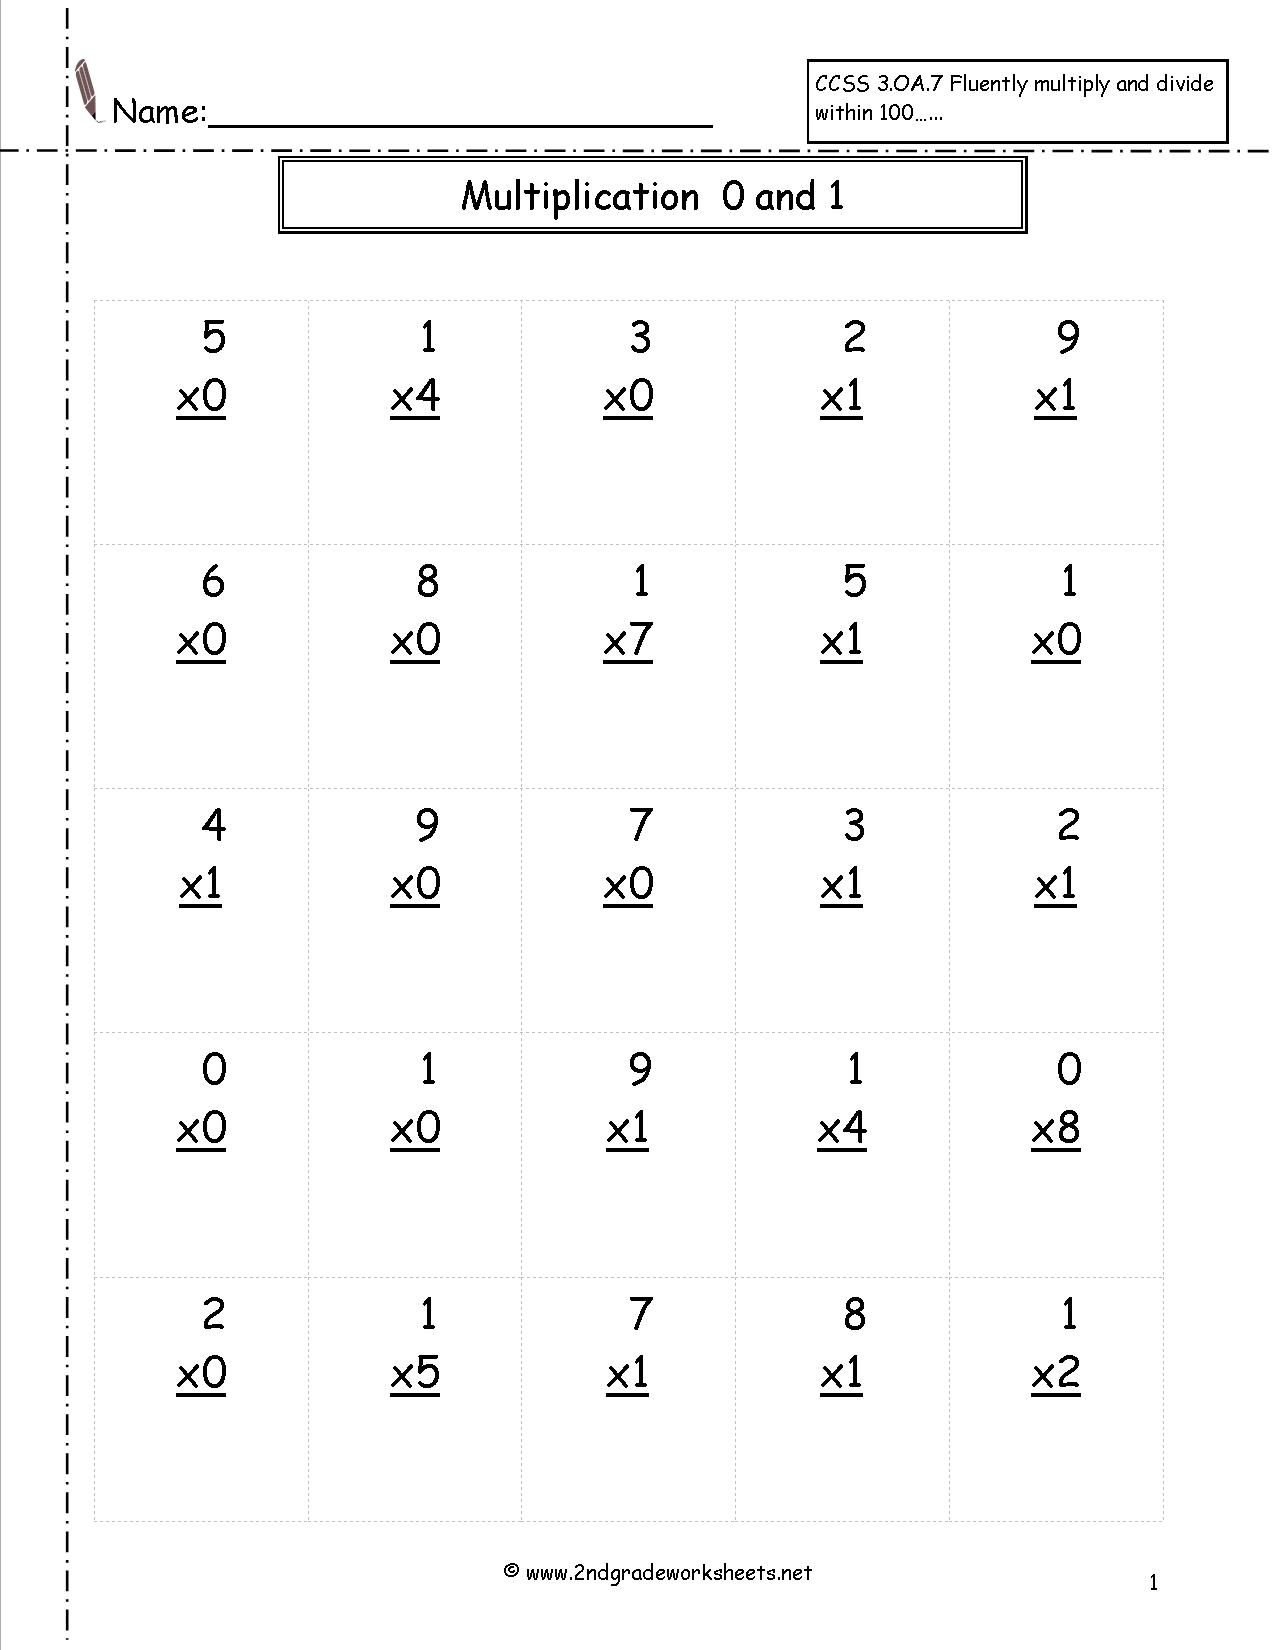 Multiplication Worksheets And Printouts throughout Free Printable Multiplication Facts Quiz